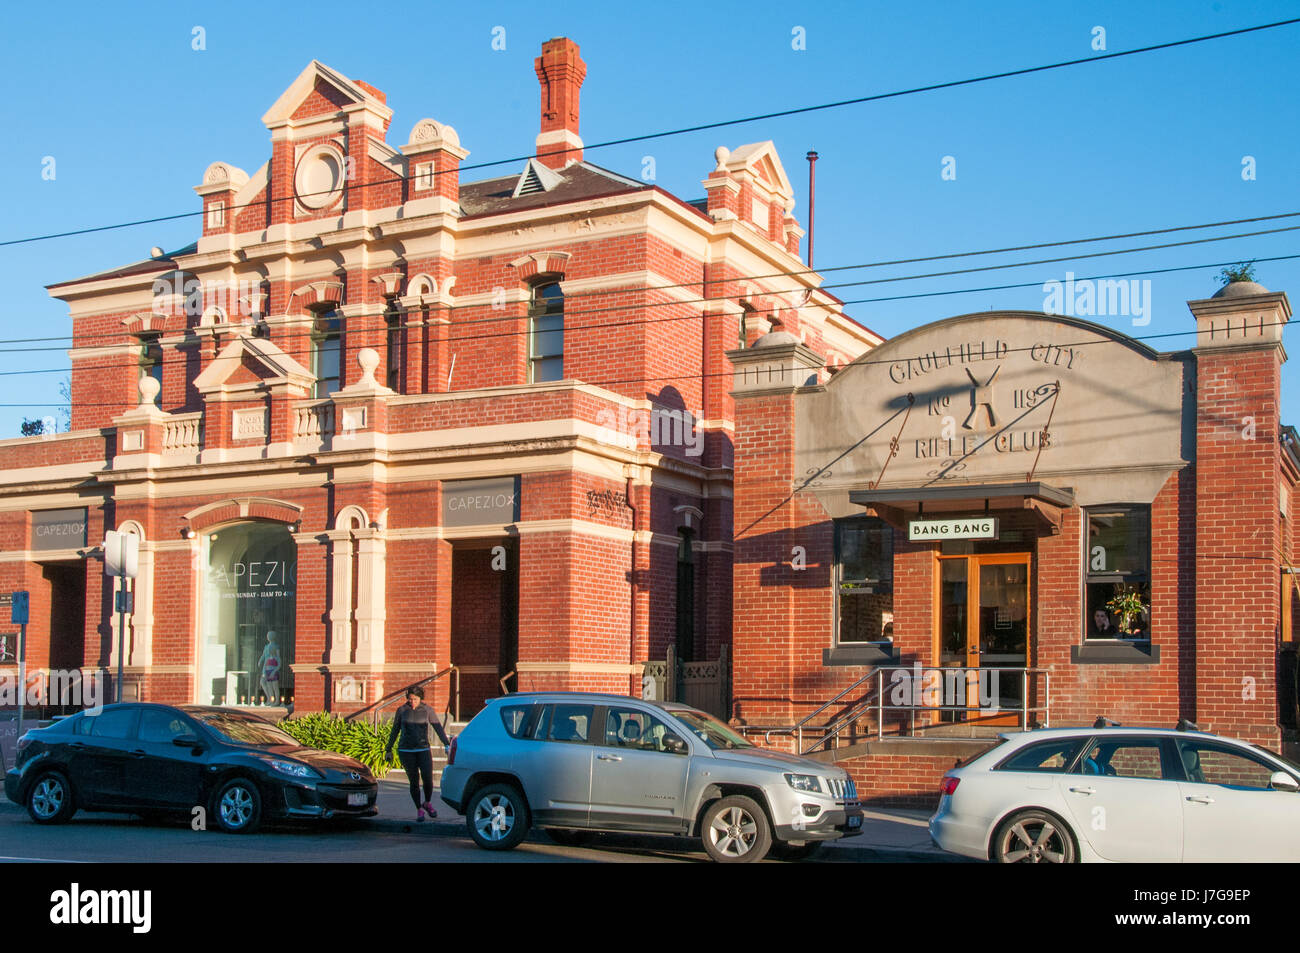 Bang Bang Restaurant in the former Rifle Club building, adjoining the former post office, at Elsternwick, Melbourne Stock Photo